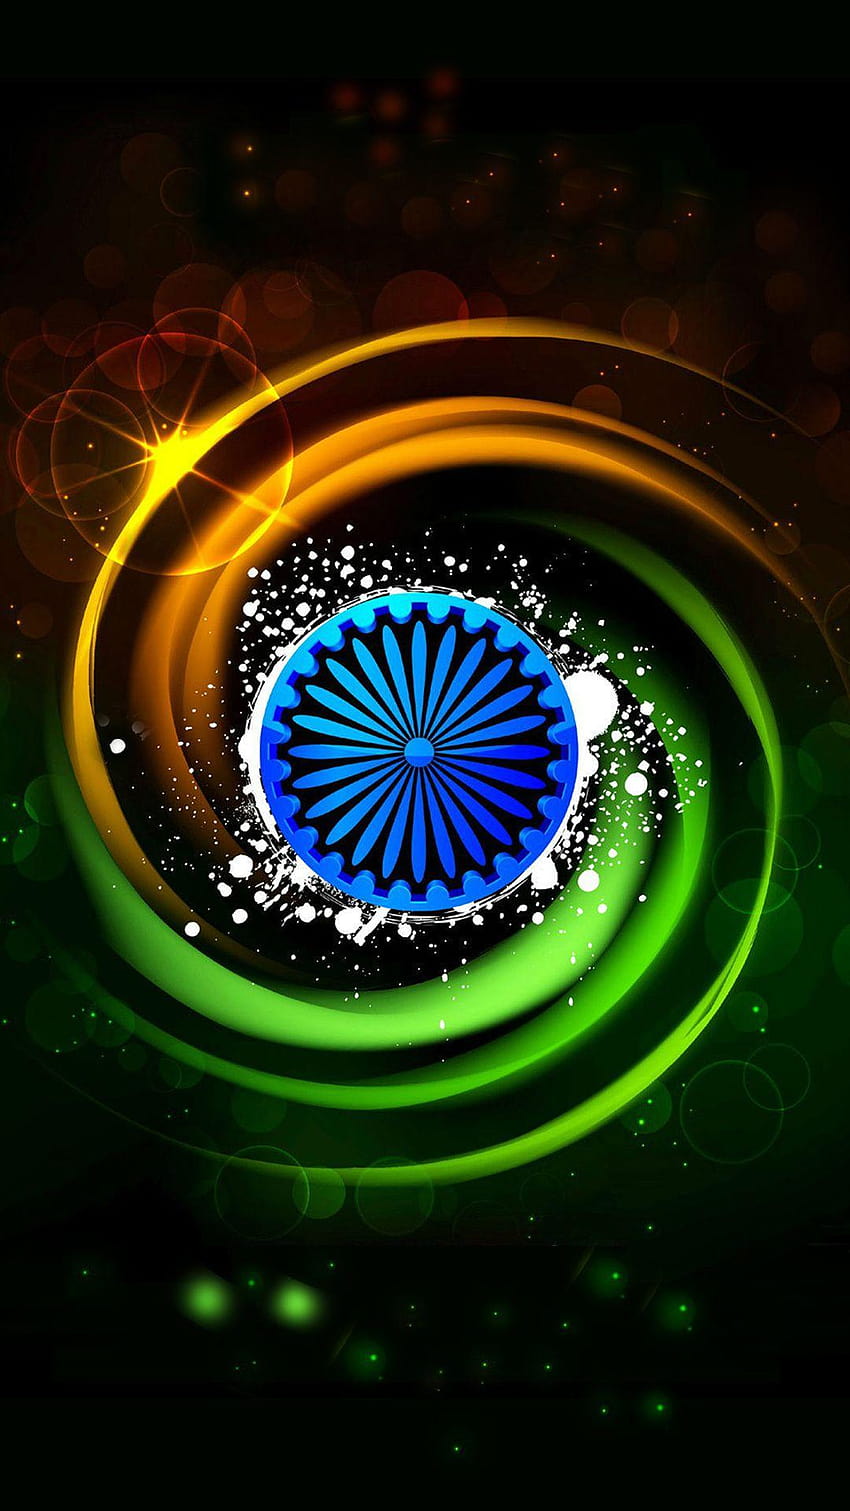 India Flag for Mobile Phone 08 of 17 – Tiranga in 3D, indian army for mobile phones HD phone wallpaper